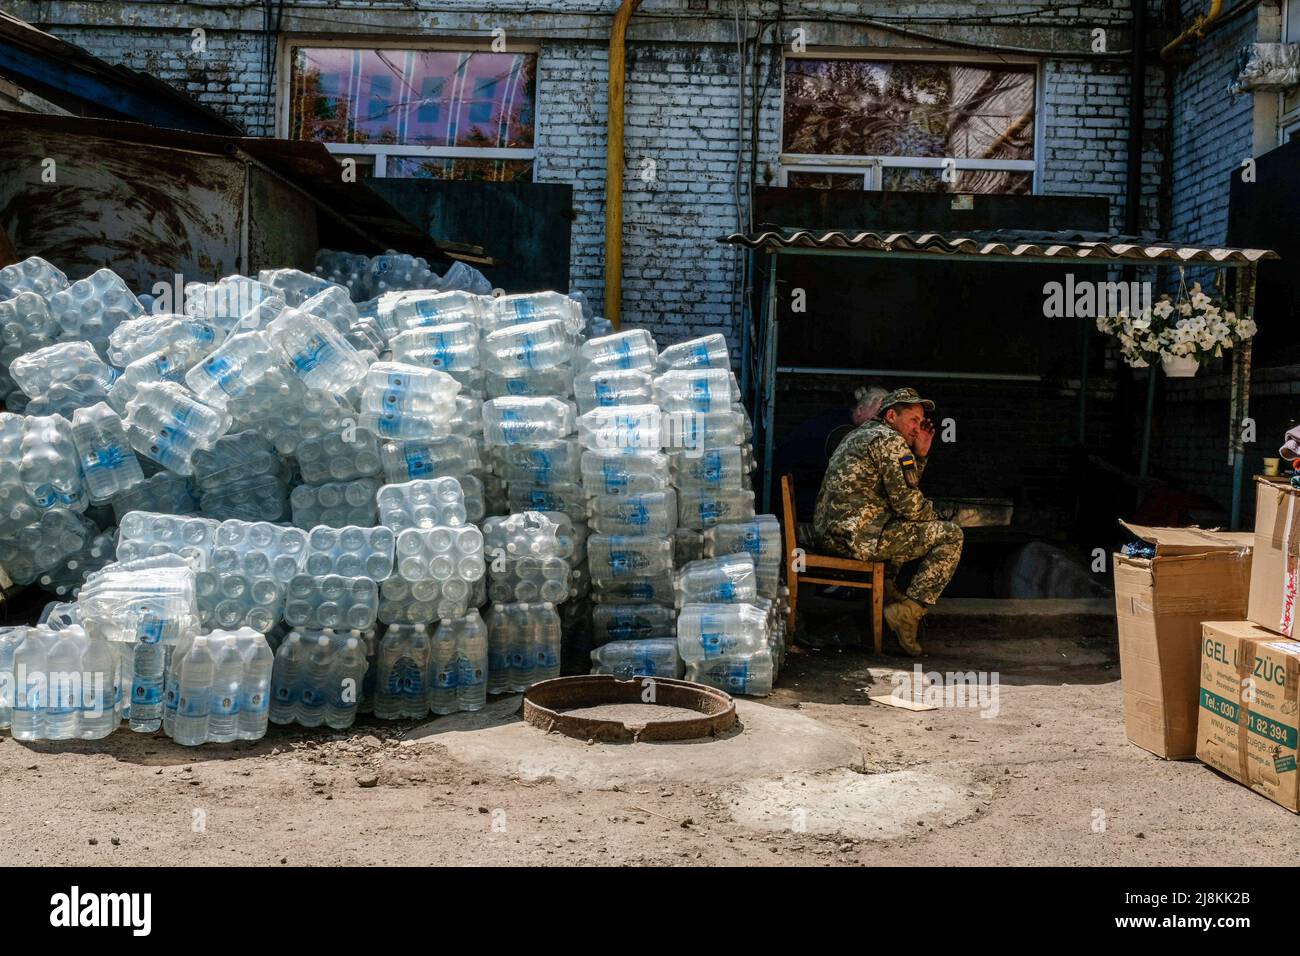 A soldier sits next to a pile of water bottles at Zaporizhia military Hospital. Zaporizhia is an industrial city of Ukraine of about 700.000 inhabitants, it has the biggest hospital of the region where every day many soldiers are brought from war frontline to be treated. Every day refugees from all over eastern Ukraine arrive to Zaporizhia Center for displaced people fleeing from combat zones or occupied territories by the Russian army. Russia invaded Ukraine on 24 February 2022, triggering the largest military attack in Europe since World War II. (Photo by Rick Mave/SOPA Images/Sipa USA) Stock Photo